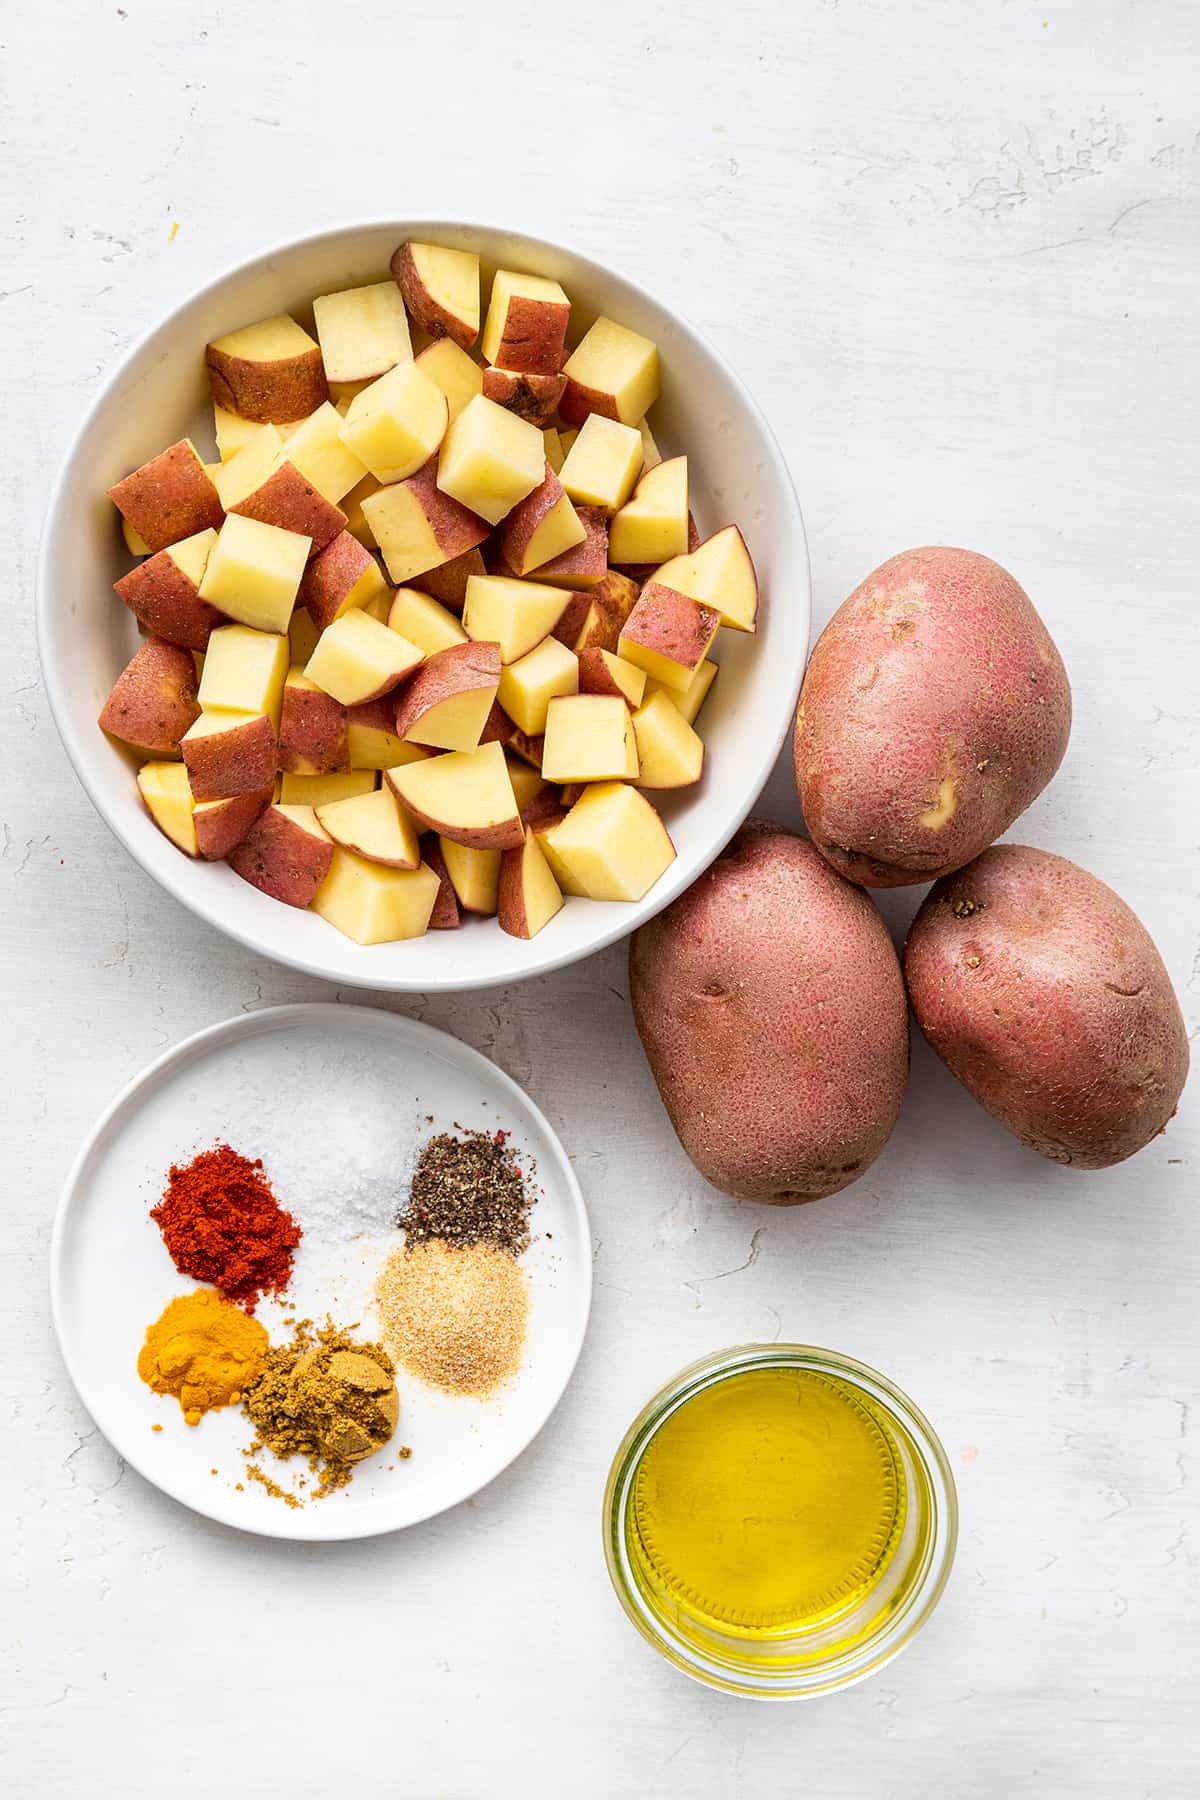 Overhead view of the ingredients needed for breakfast potatoes: three red potatoes, a bowl of chopped up potato cubes, a bowl of olive oil, and a plate with salt, pepper, garlic powder, smoked paprika, turmeric, and ras el hanout.